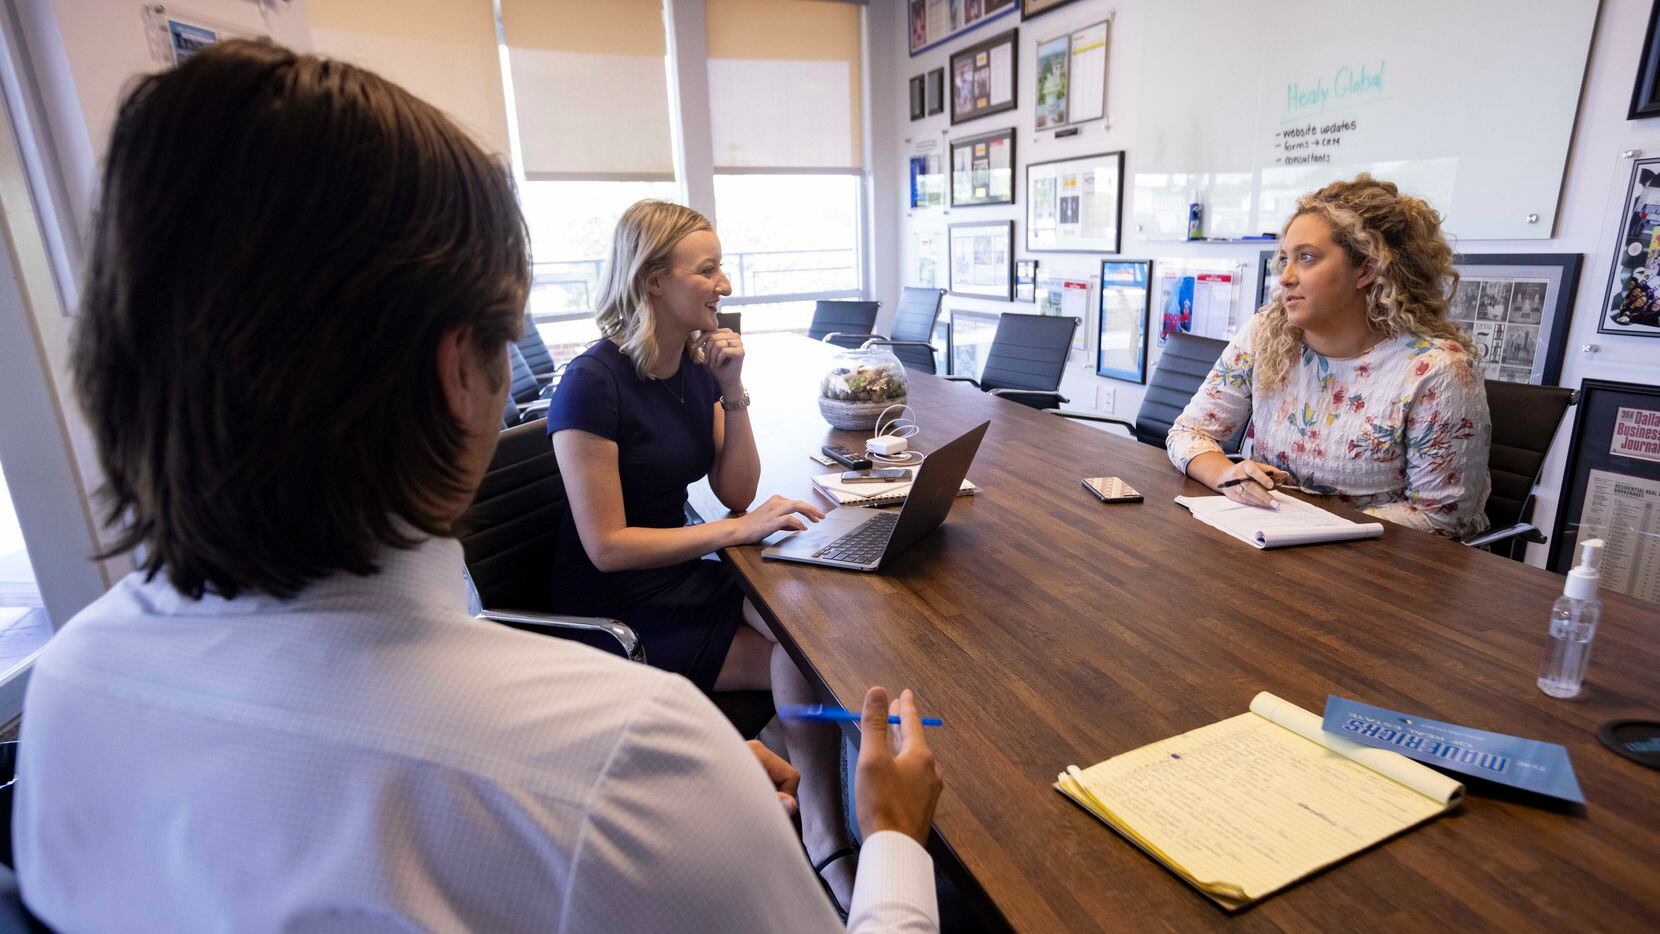 From left: Client relationship coordinators Michael Salerno and Molly Evans meet with graphic designer Maddie Hess at the Rogers Healy and Associates office in Dallas.